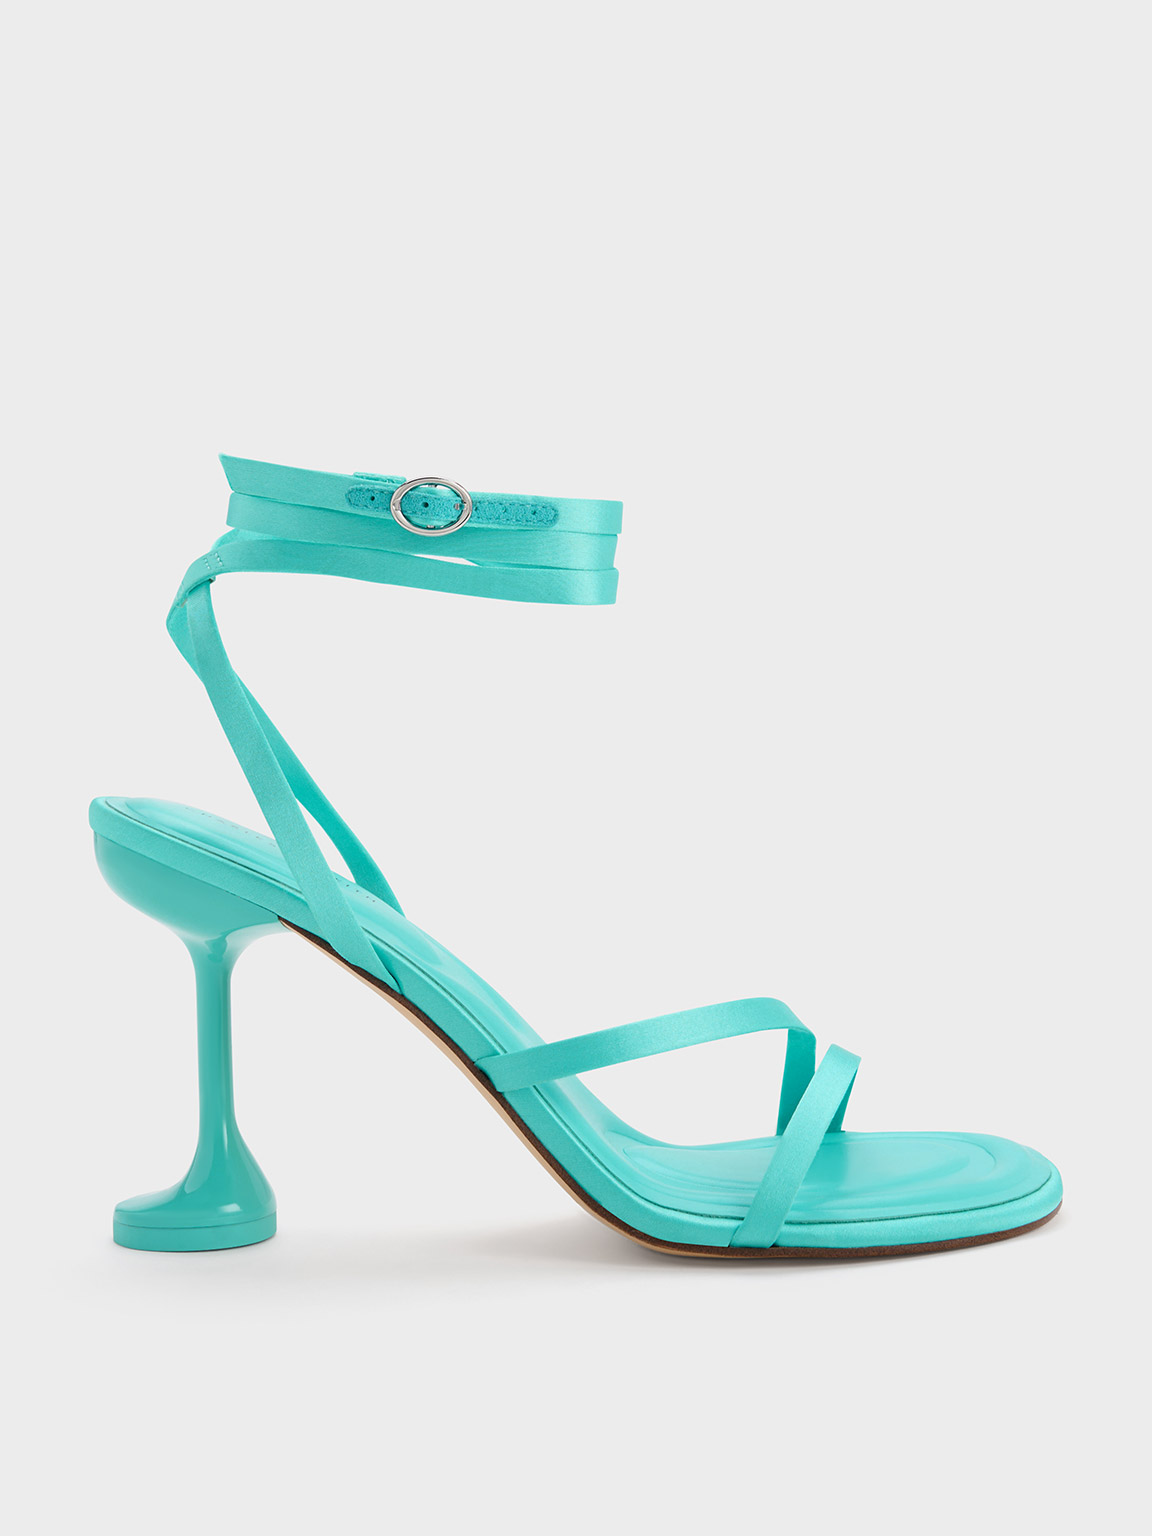 Bringing The Fun Strappy Square Toe Heeled Sandal (Teal) | Square toe heels,  Sandals heels, Square toe